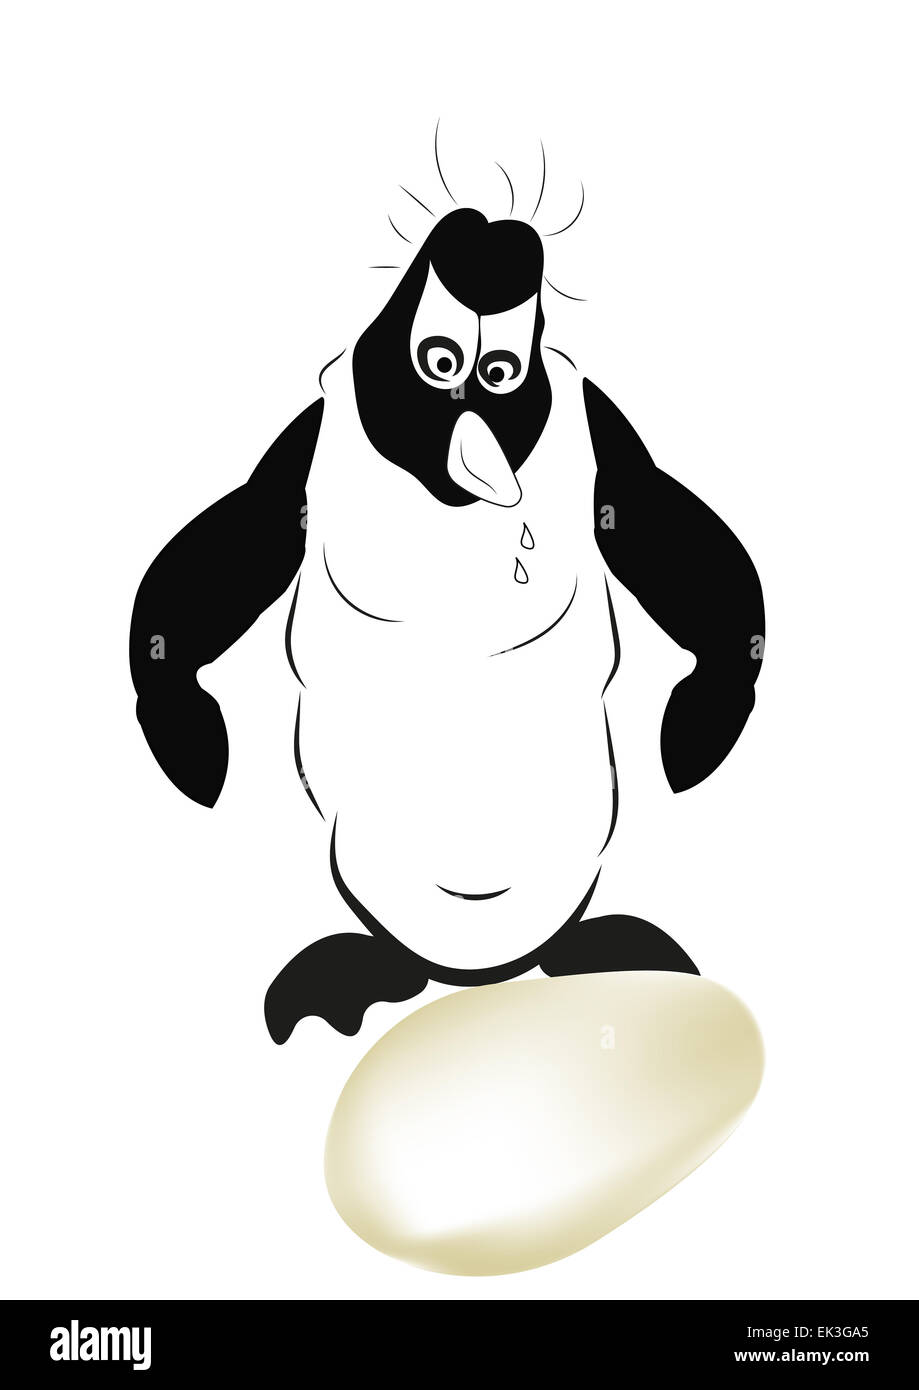 Surprised old penguin looks at the egg Stock Photo